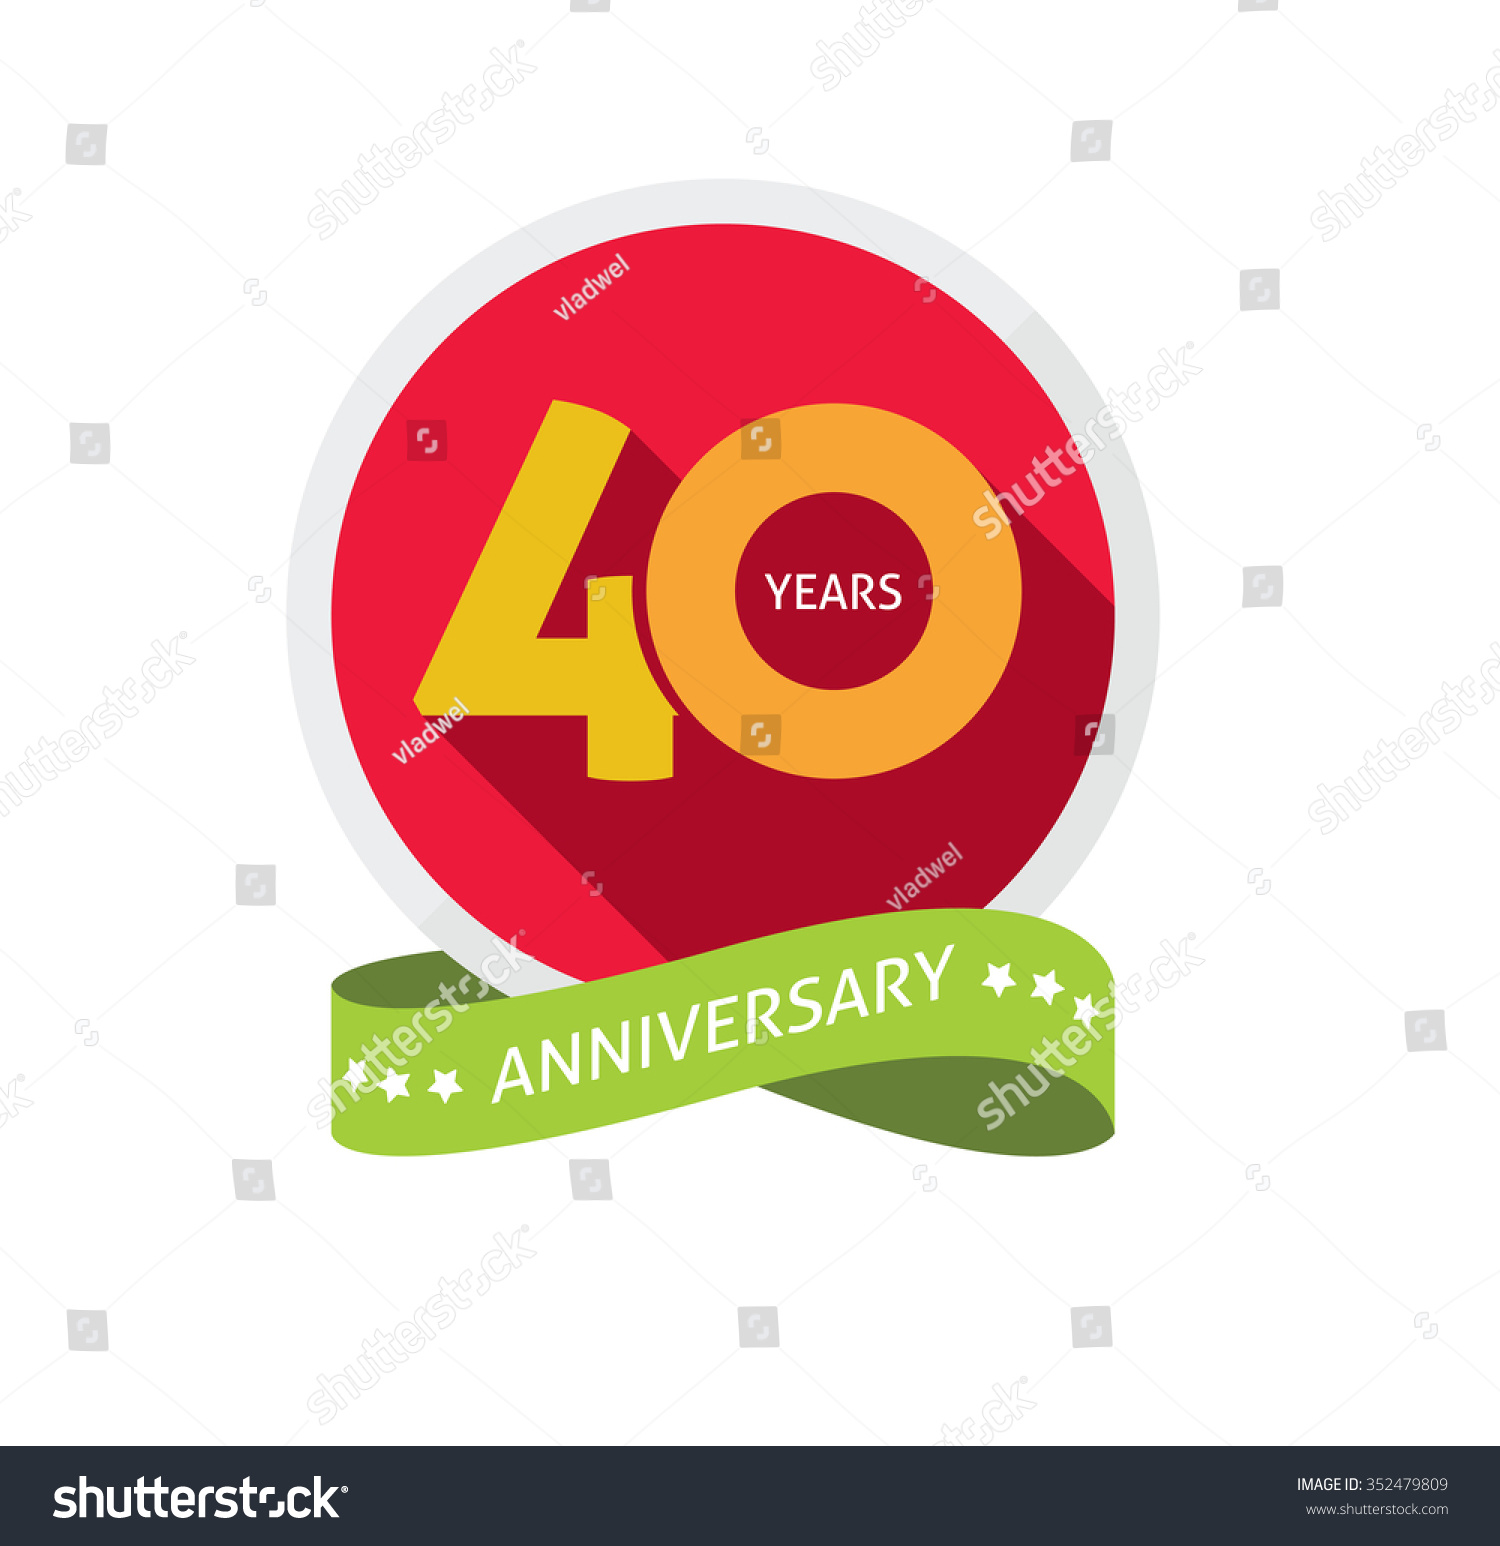 40th-anniversary-logo-template-with-shadow-on-circle-number-4-four-40-years-icon-forty-years